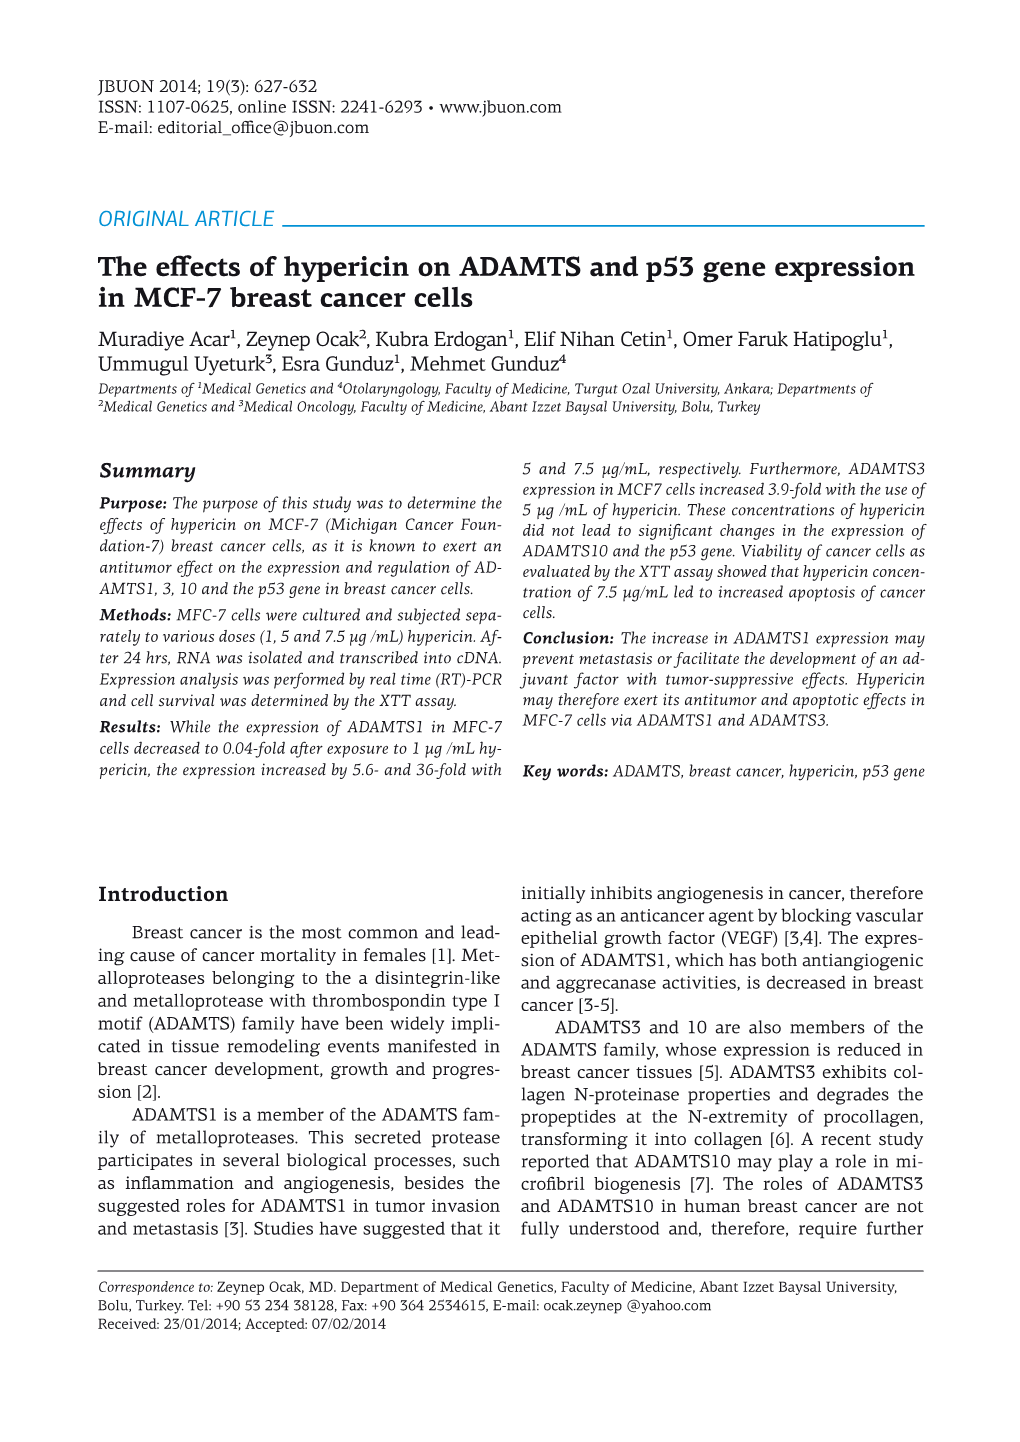 The Effects of Hypericin on ADAMTS and P53 Gene Expression in MCF-7 Breast Cancer Cells